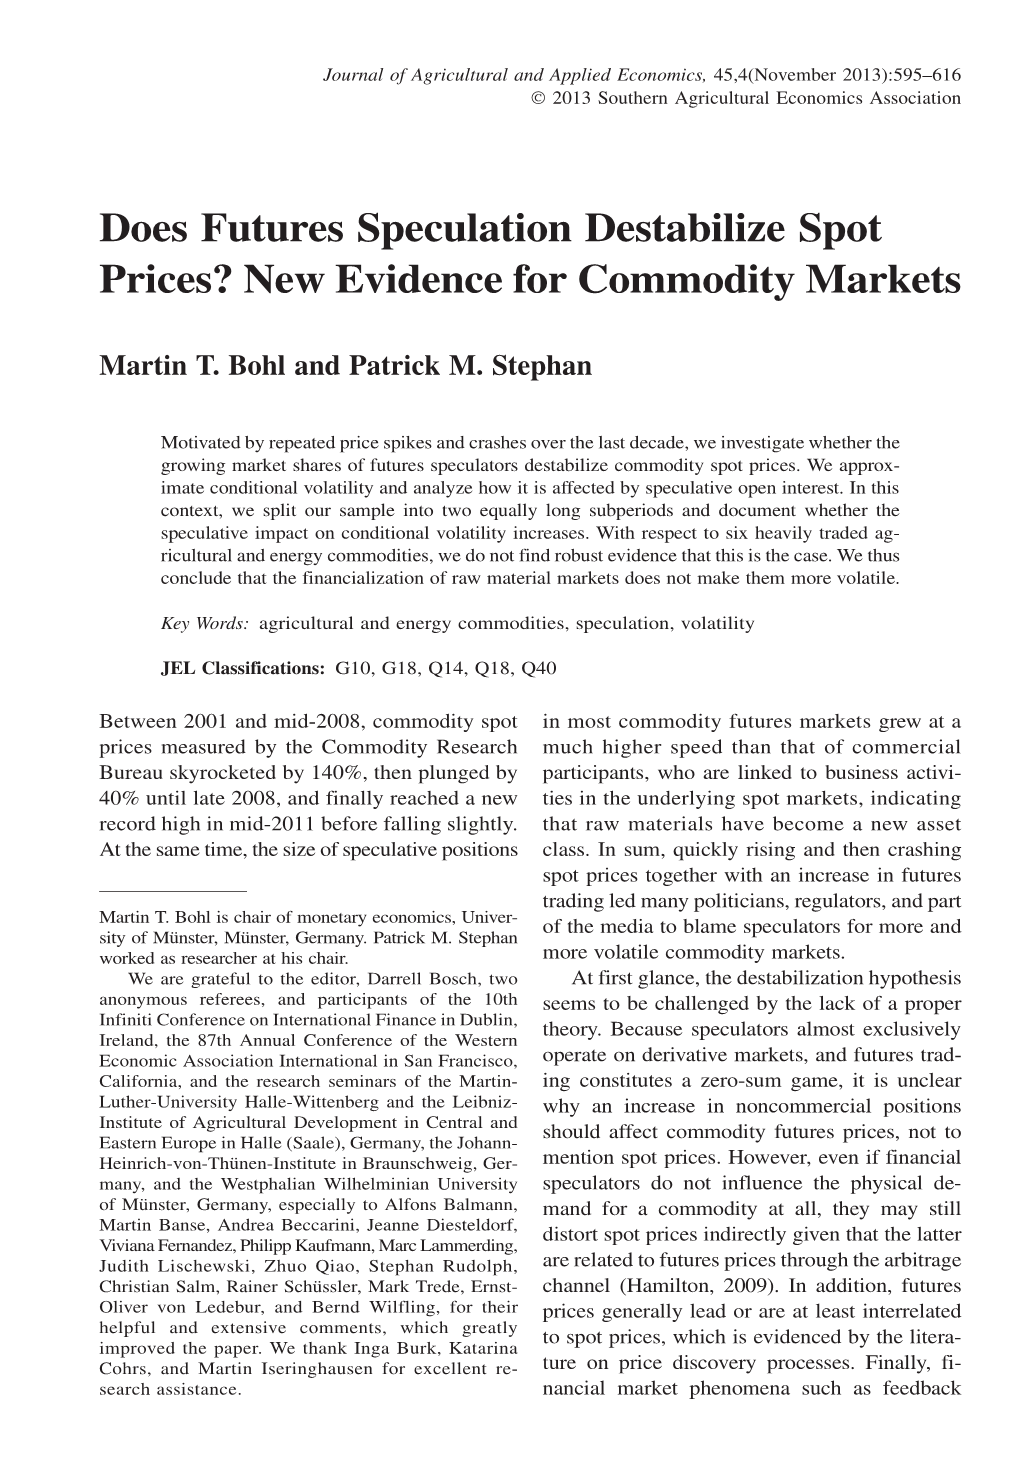 Does Futures Speculation Destabilize Spot Prices? New Evidence for Commodity Markets